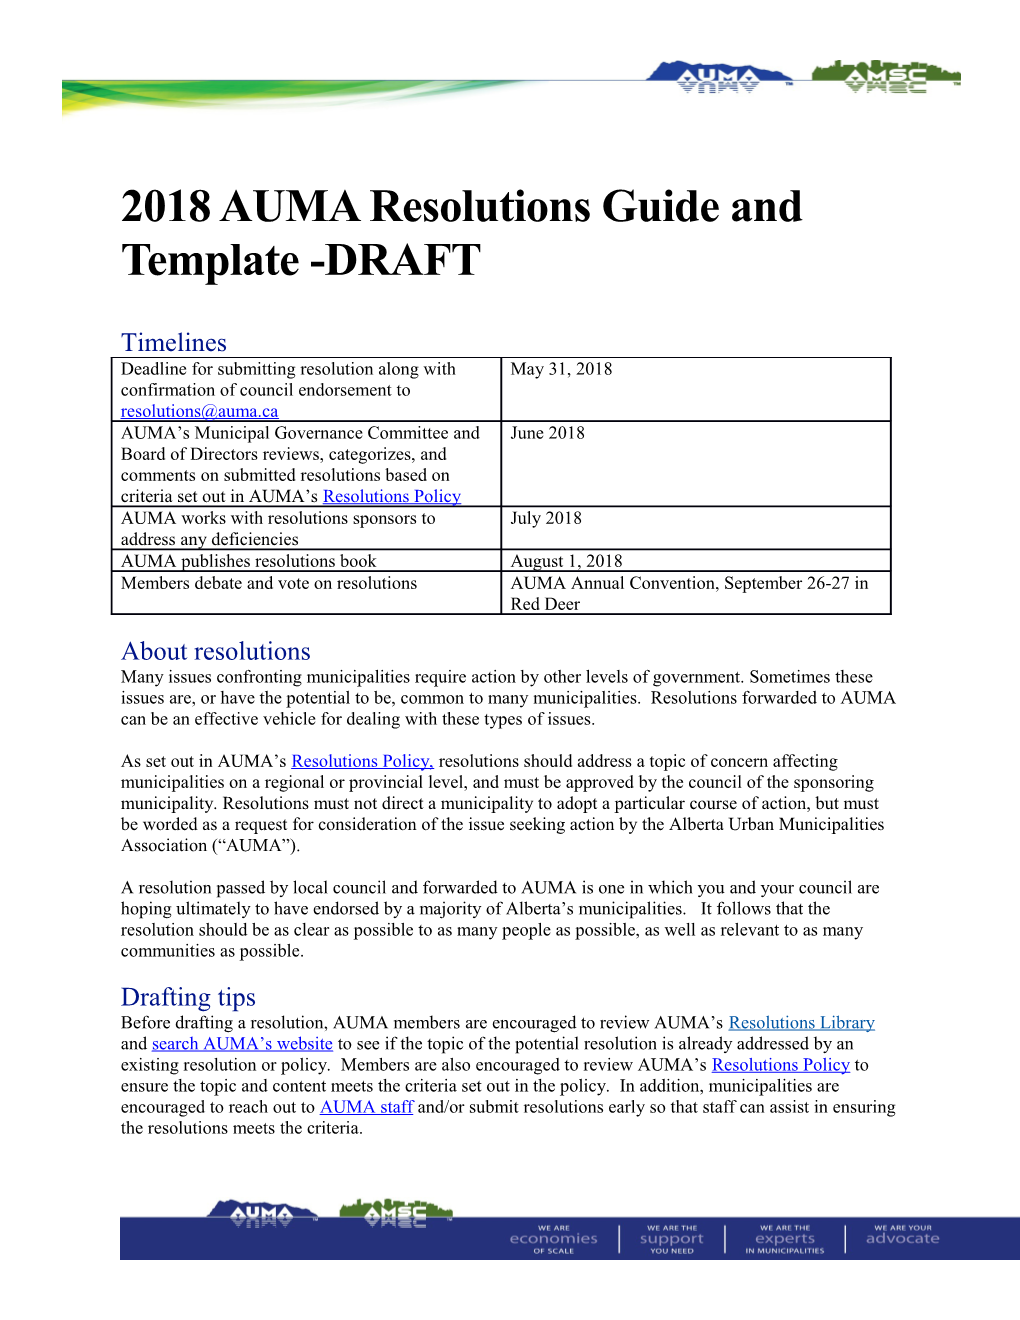 2018 AUMA Resolutions Guide and Template -DRAFT